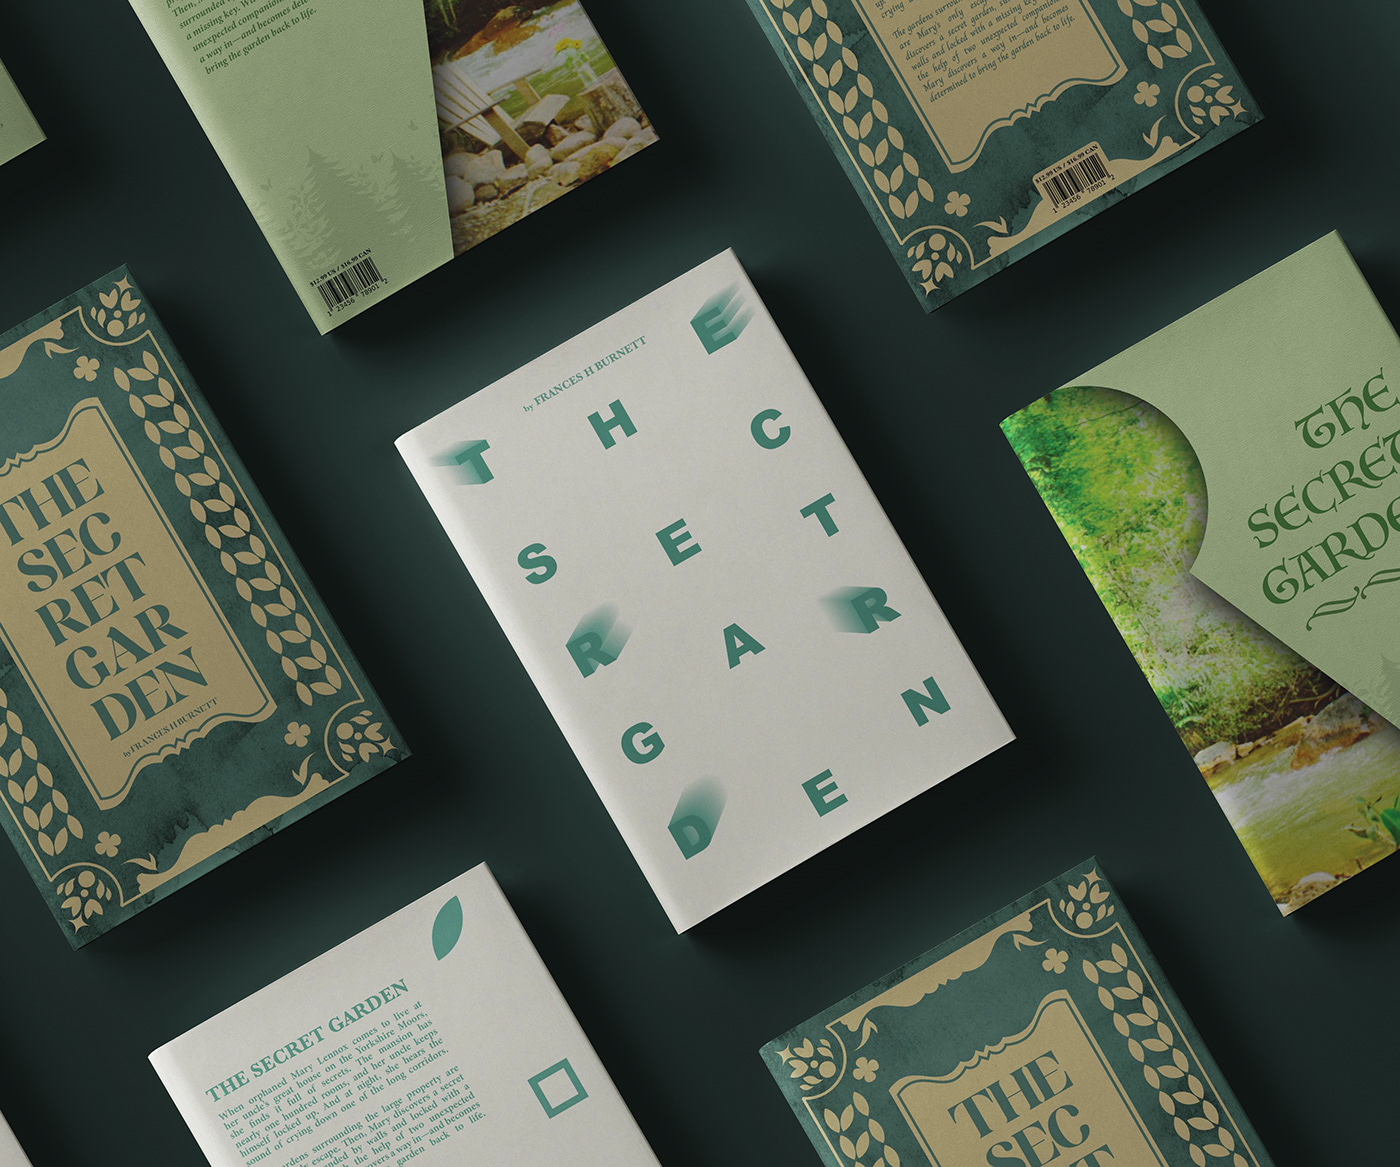 book cover book design books book cover Layout typography   pattern The Secret Garden cover design